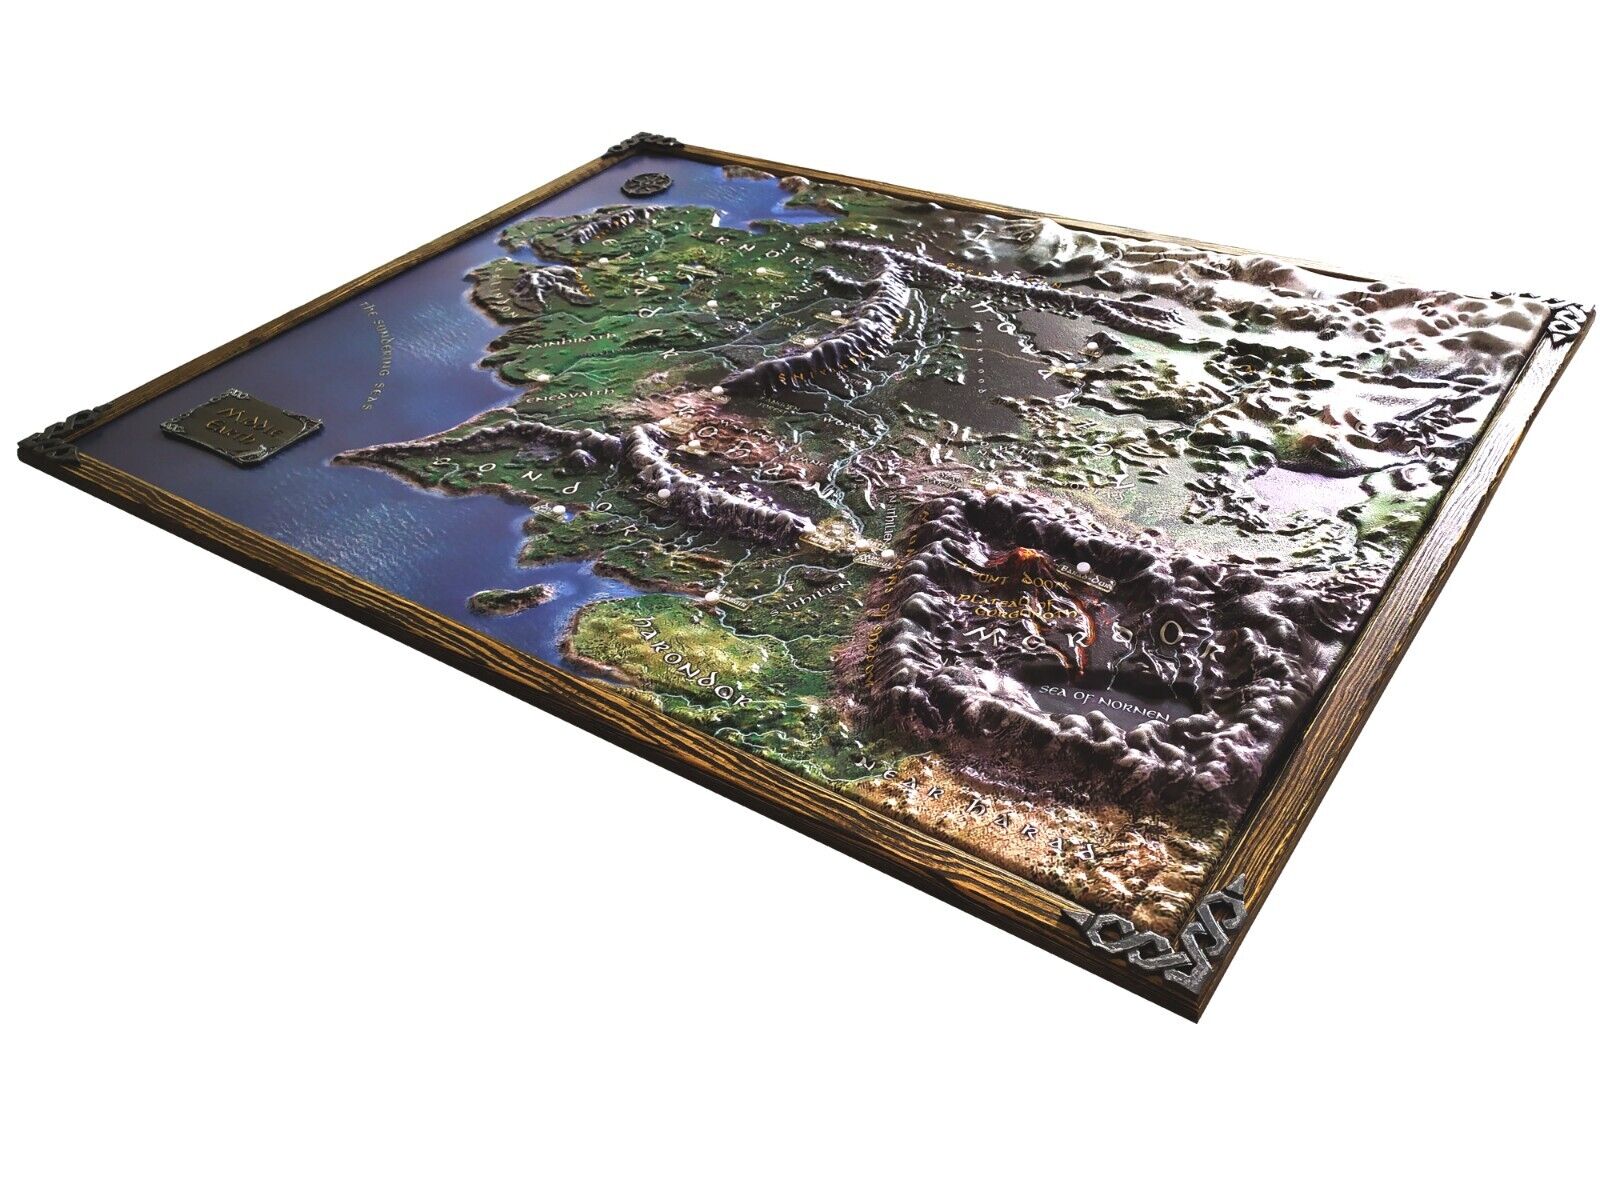 Middle-earth Odyssey: Limited Edition 3D Map Inspired by J.R.R. Tolkien's